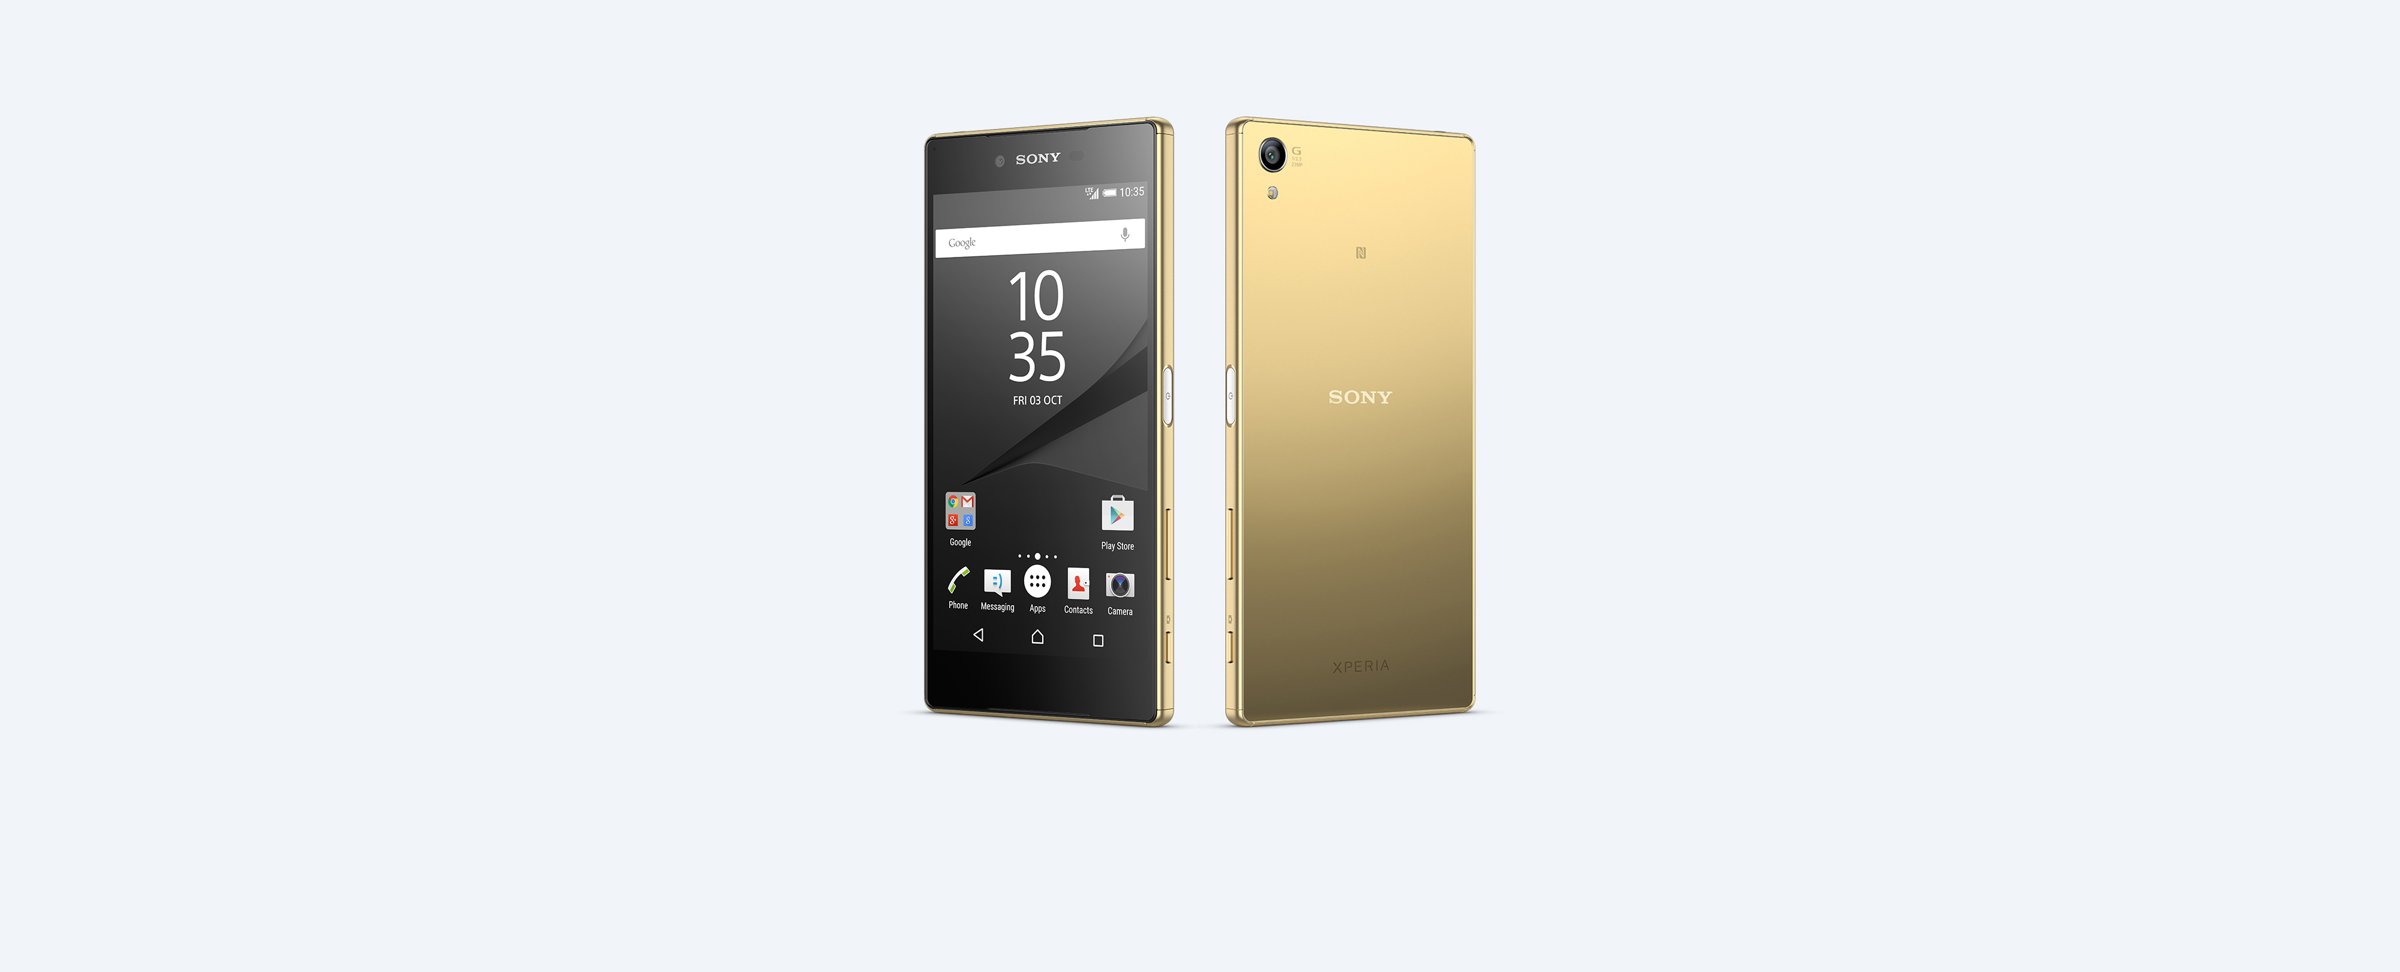 Sony Xperia Z5 successor to debut at MWC 2017, but only in incognito mode